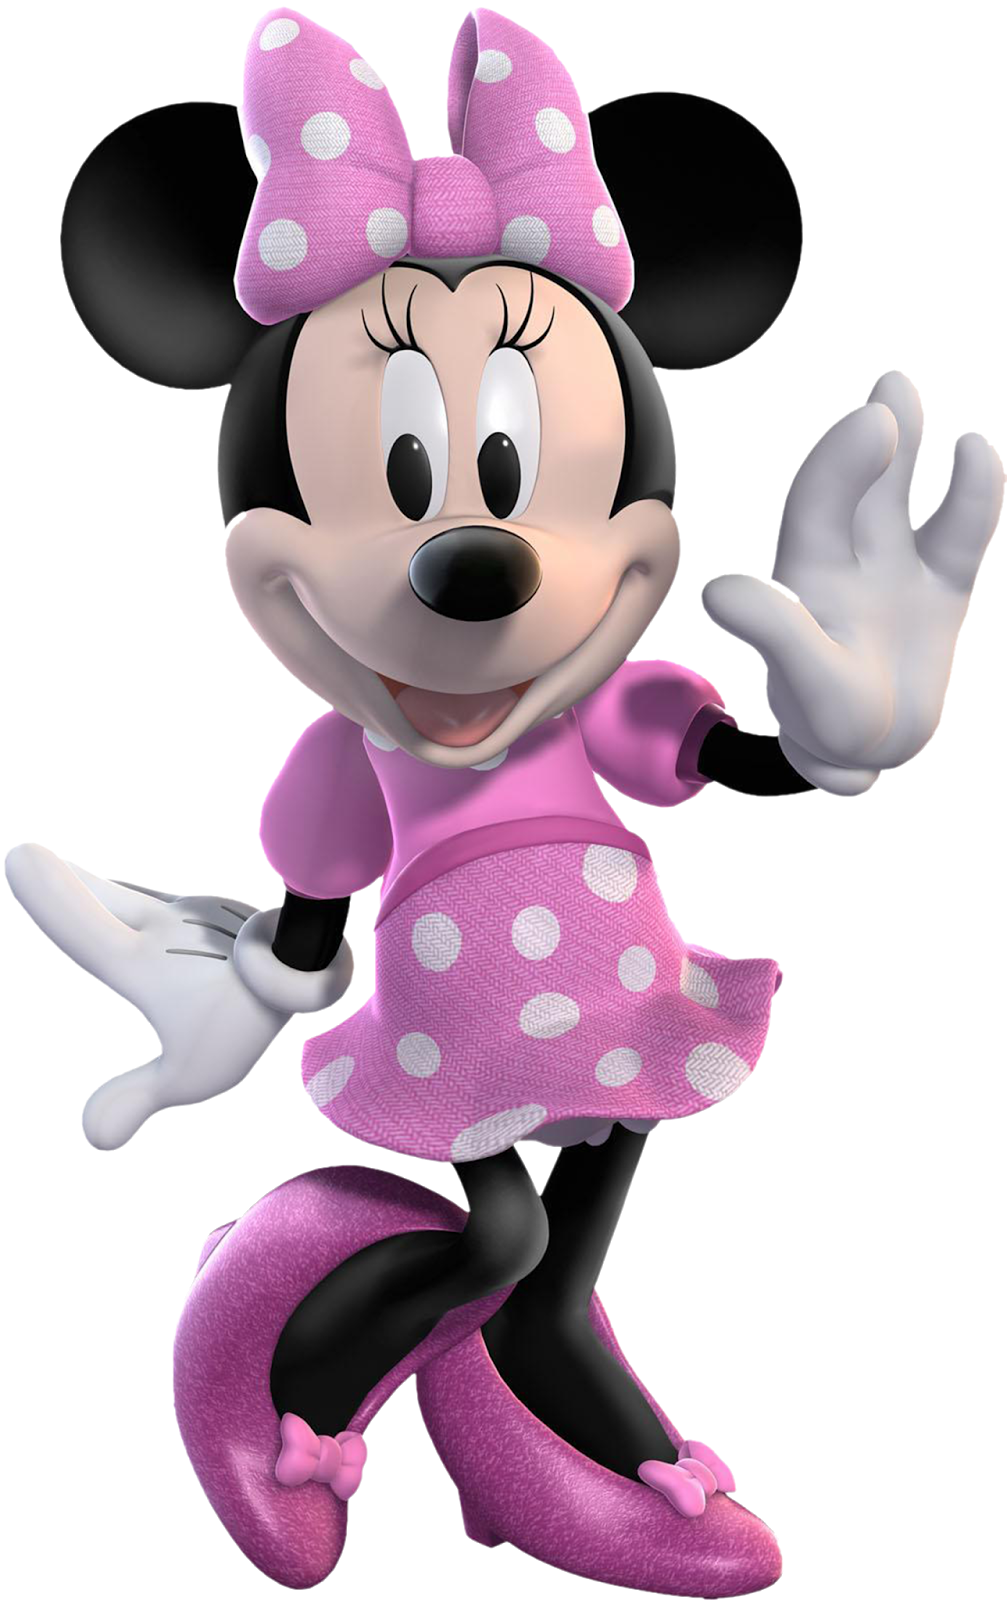 Pink Polka Dress, Pink Shoes, Minnie Mouse Transparent PNG #40240